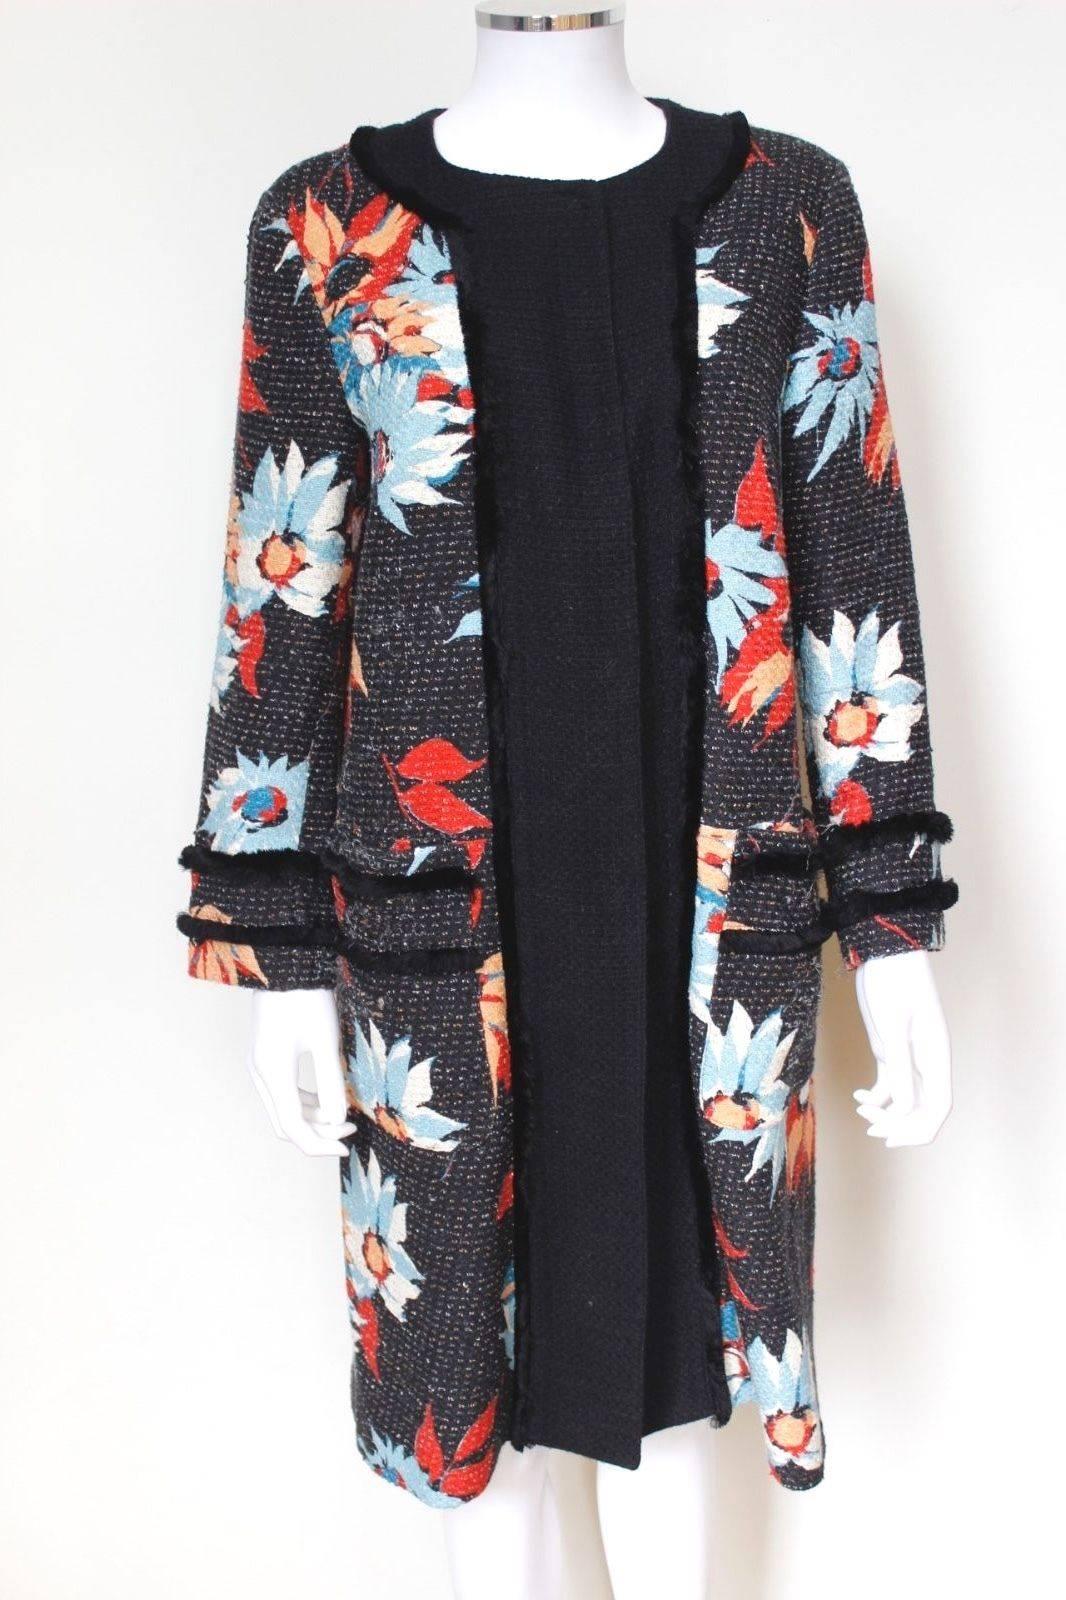 £2175 Etro Black Floral Bouclé Trim Coat 48 uk 14- 16

Bouclé black blue floral collarless coat, perfect for spring 

Polyester 6% Polyamide 2%Viscose 5%,Cotton 87%

Length 38 inches, sleeves 21.5 inches, chest 21 inches across laid flat 
